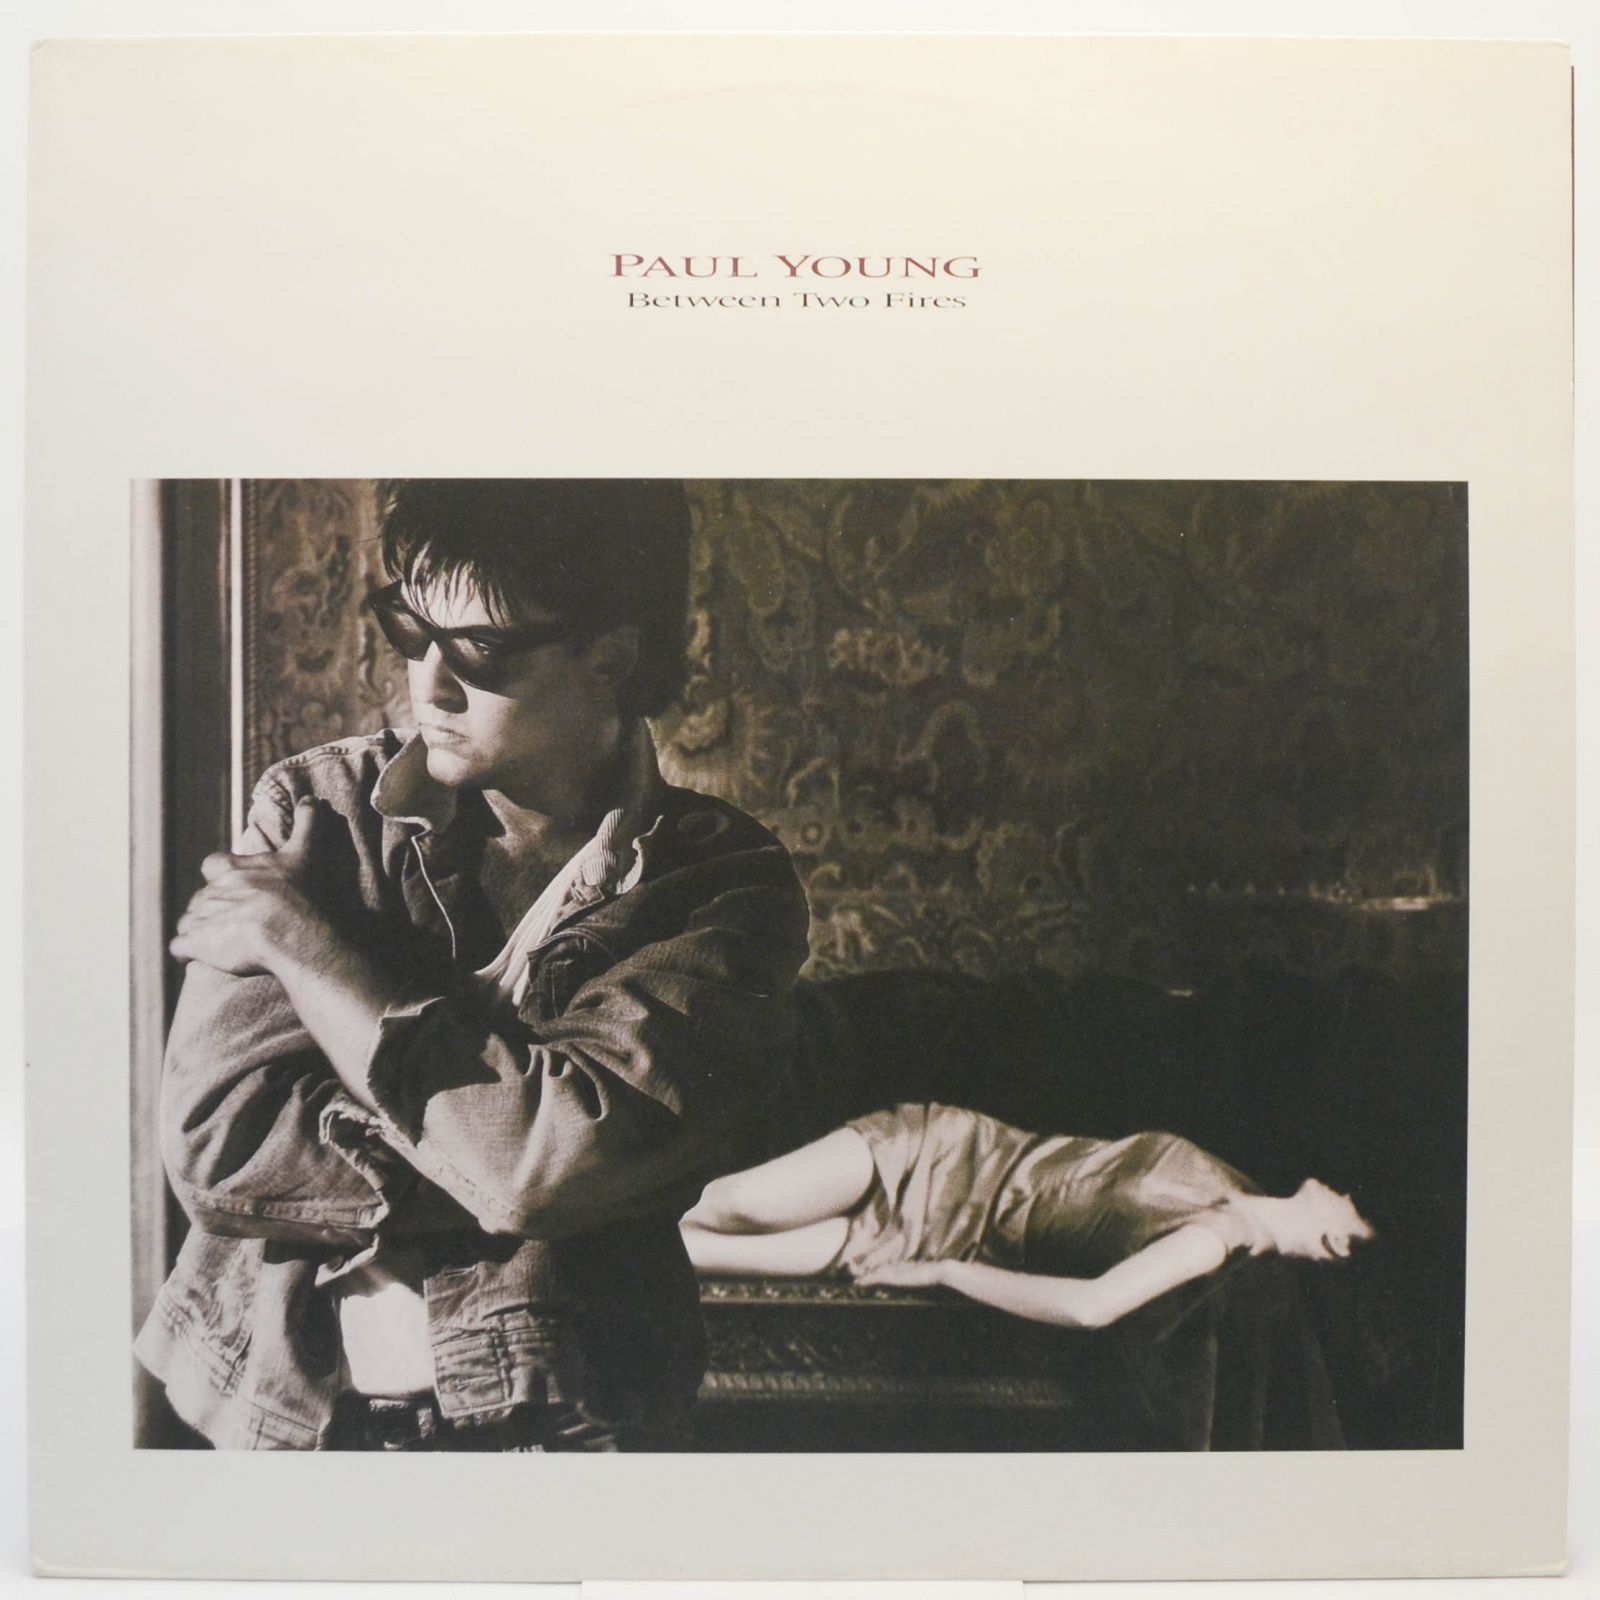 Paul Young — Between Two Fires, 1986